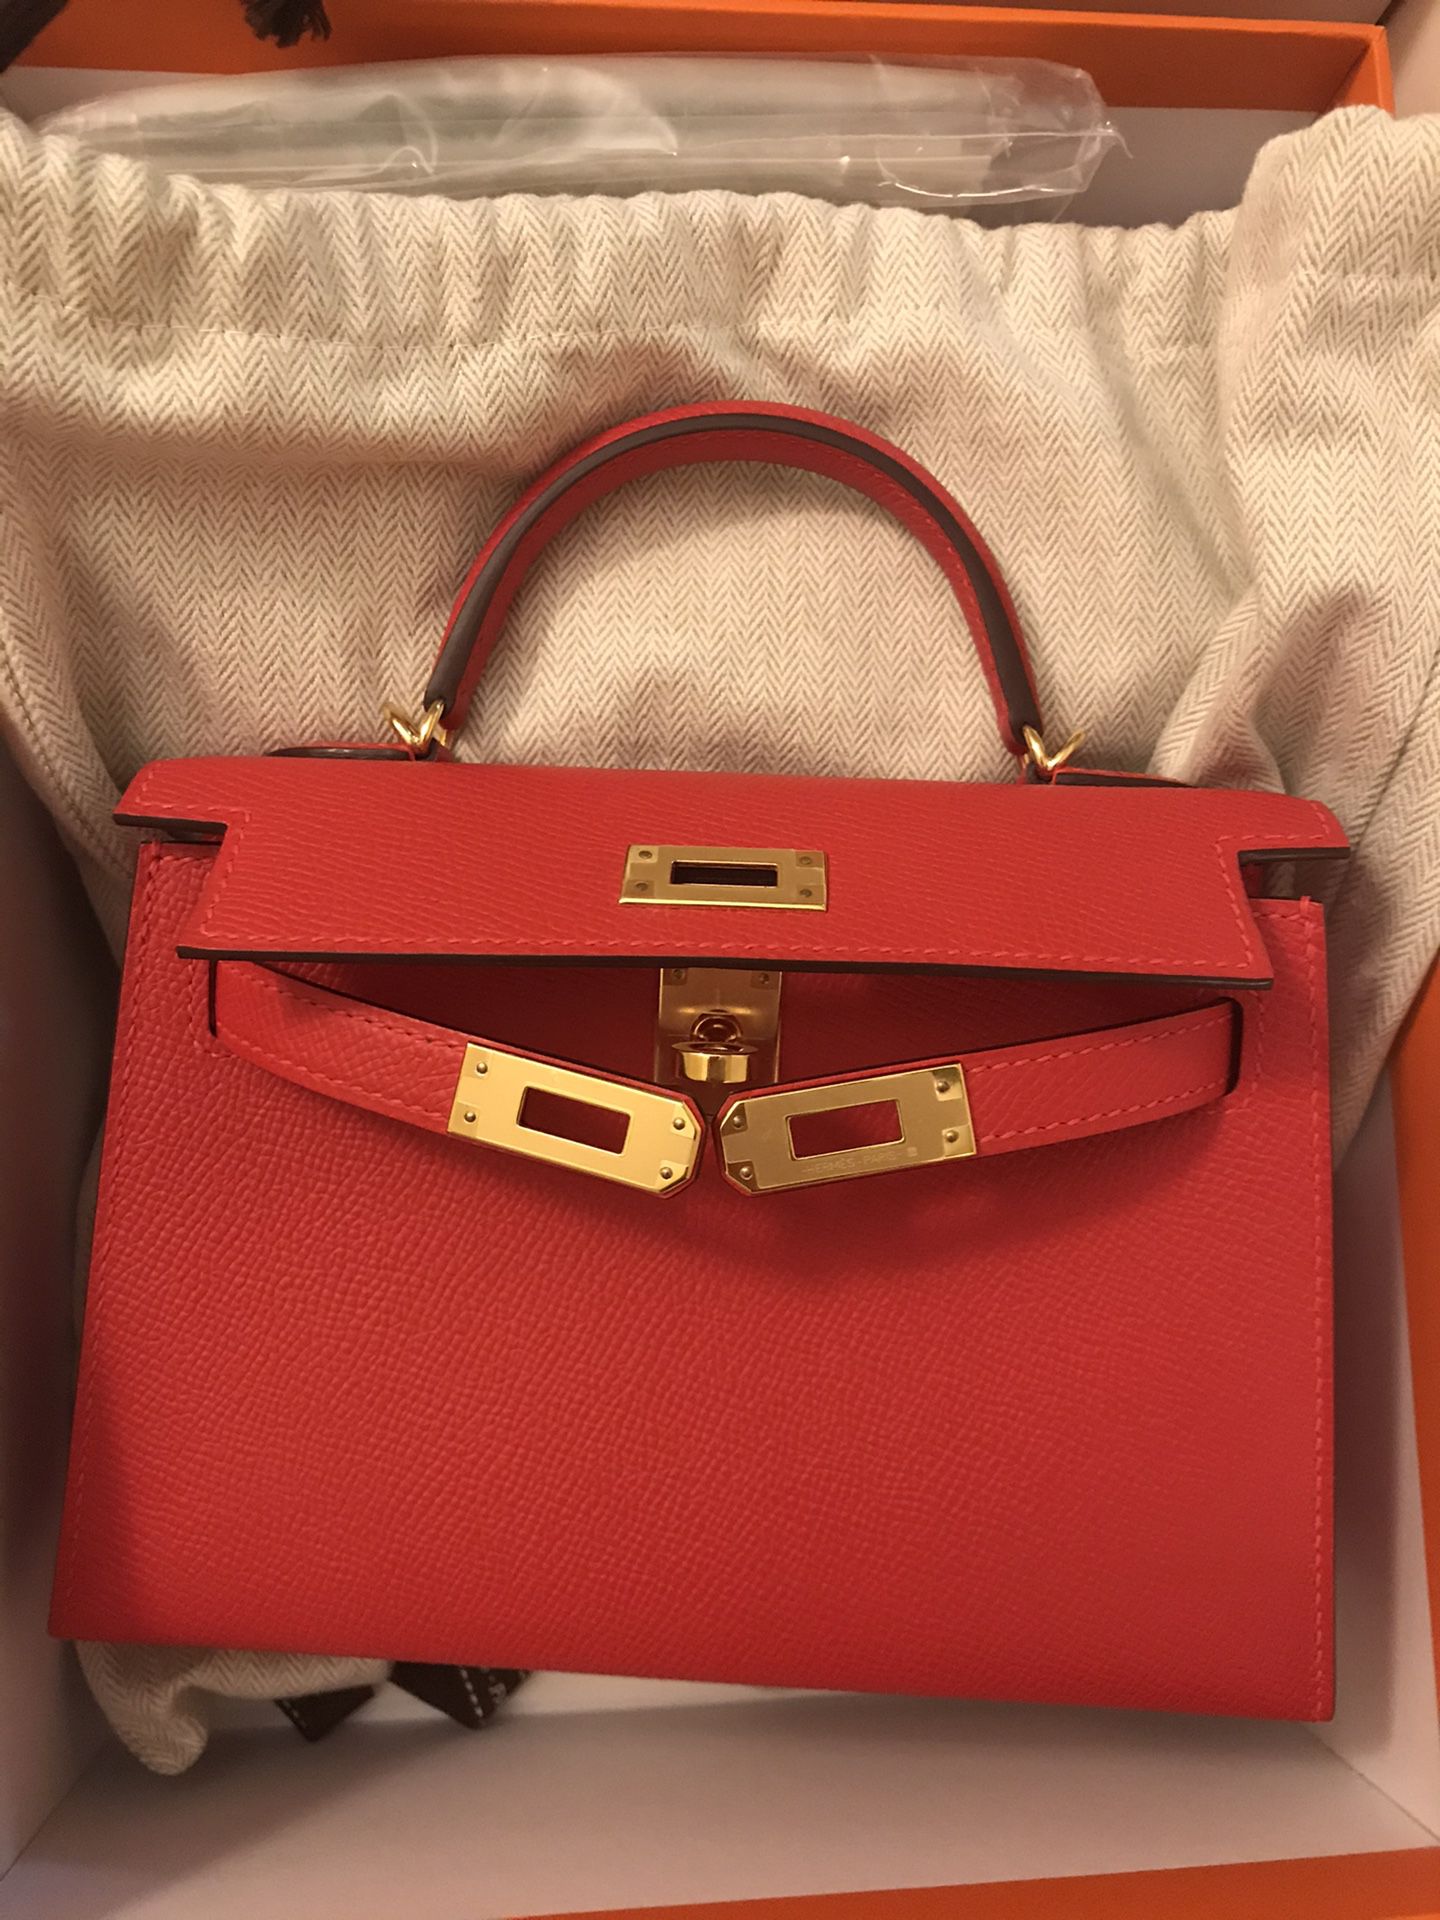 Hermès Kelly Mini Veau Epsom Rogue Red Size 18 for Sale in